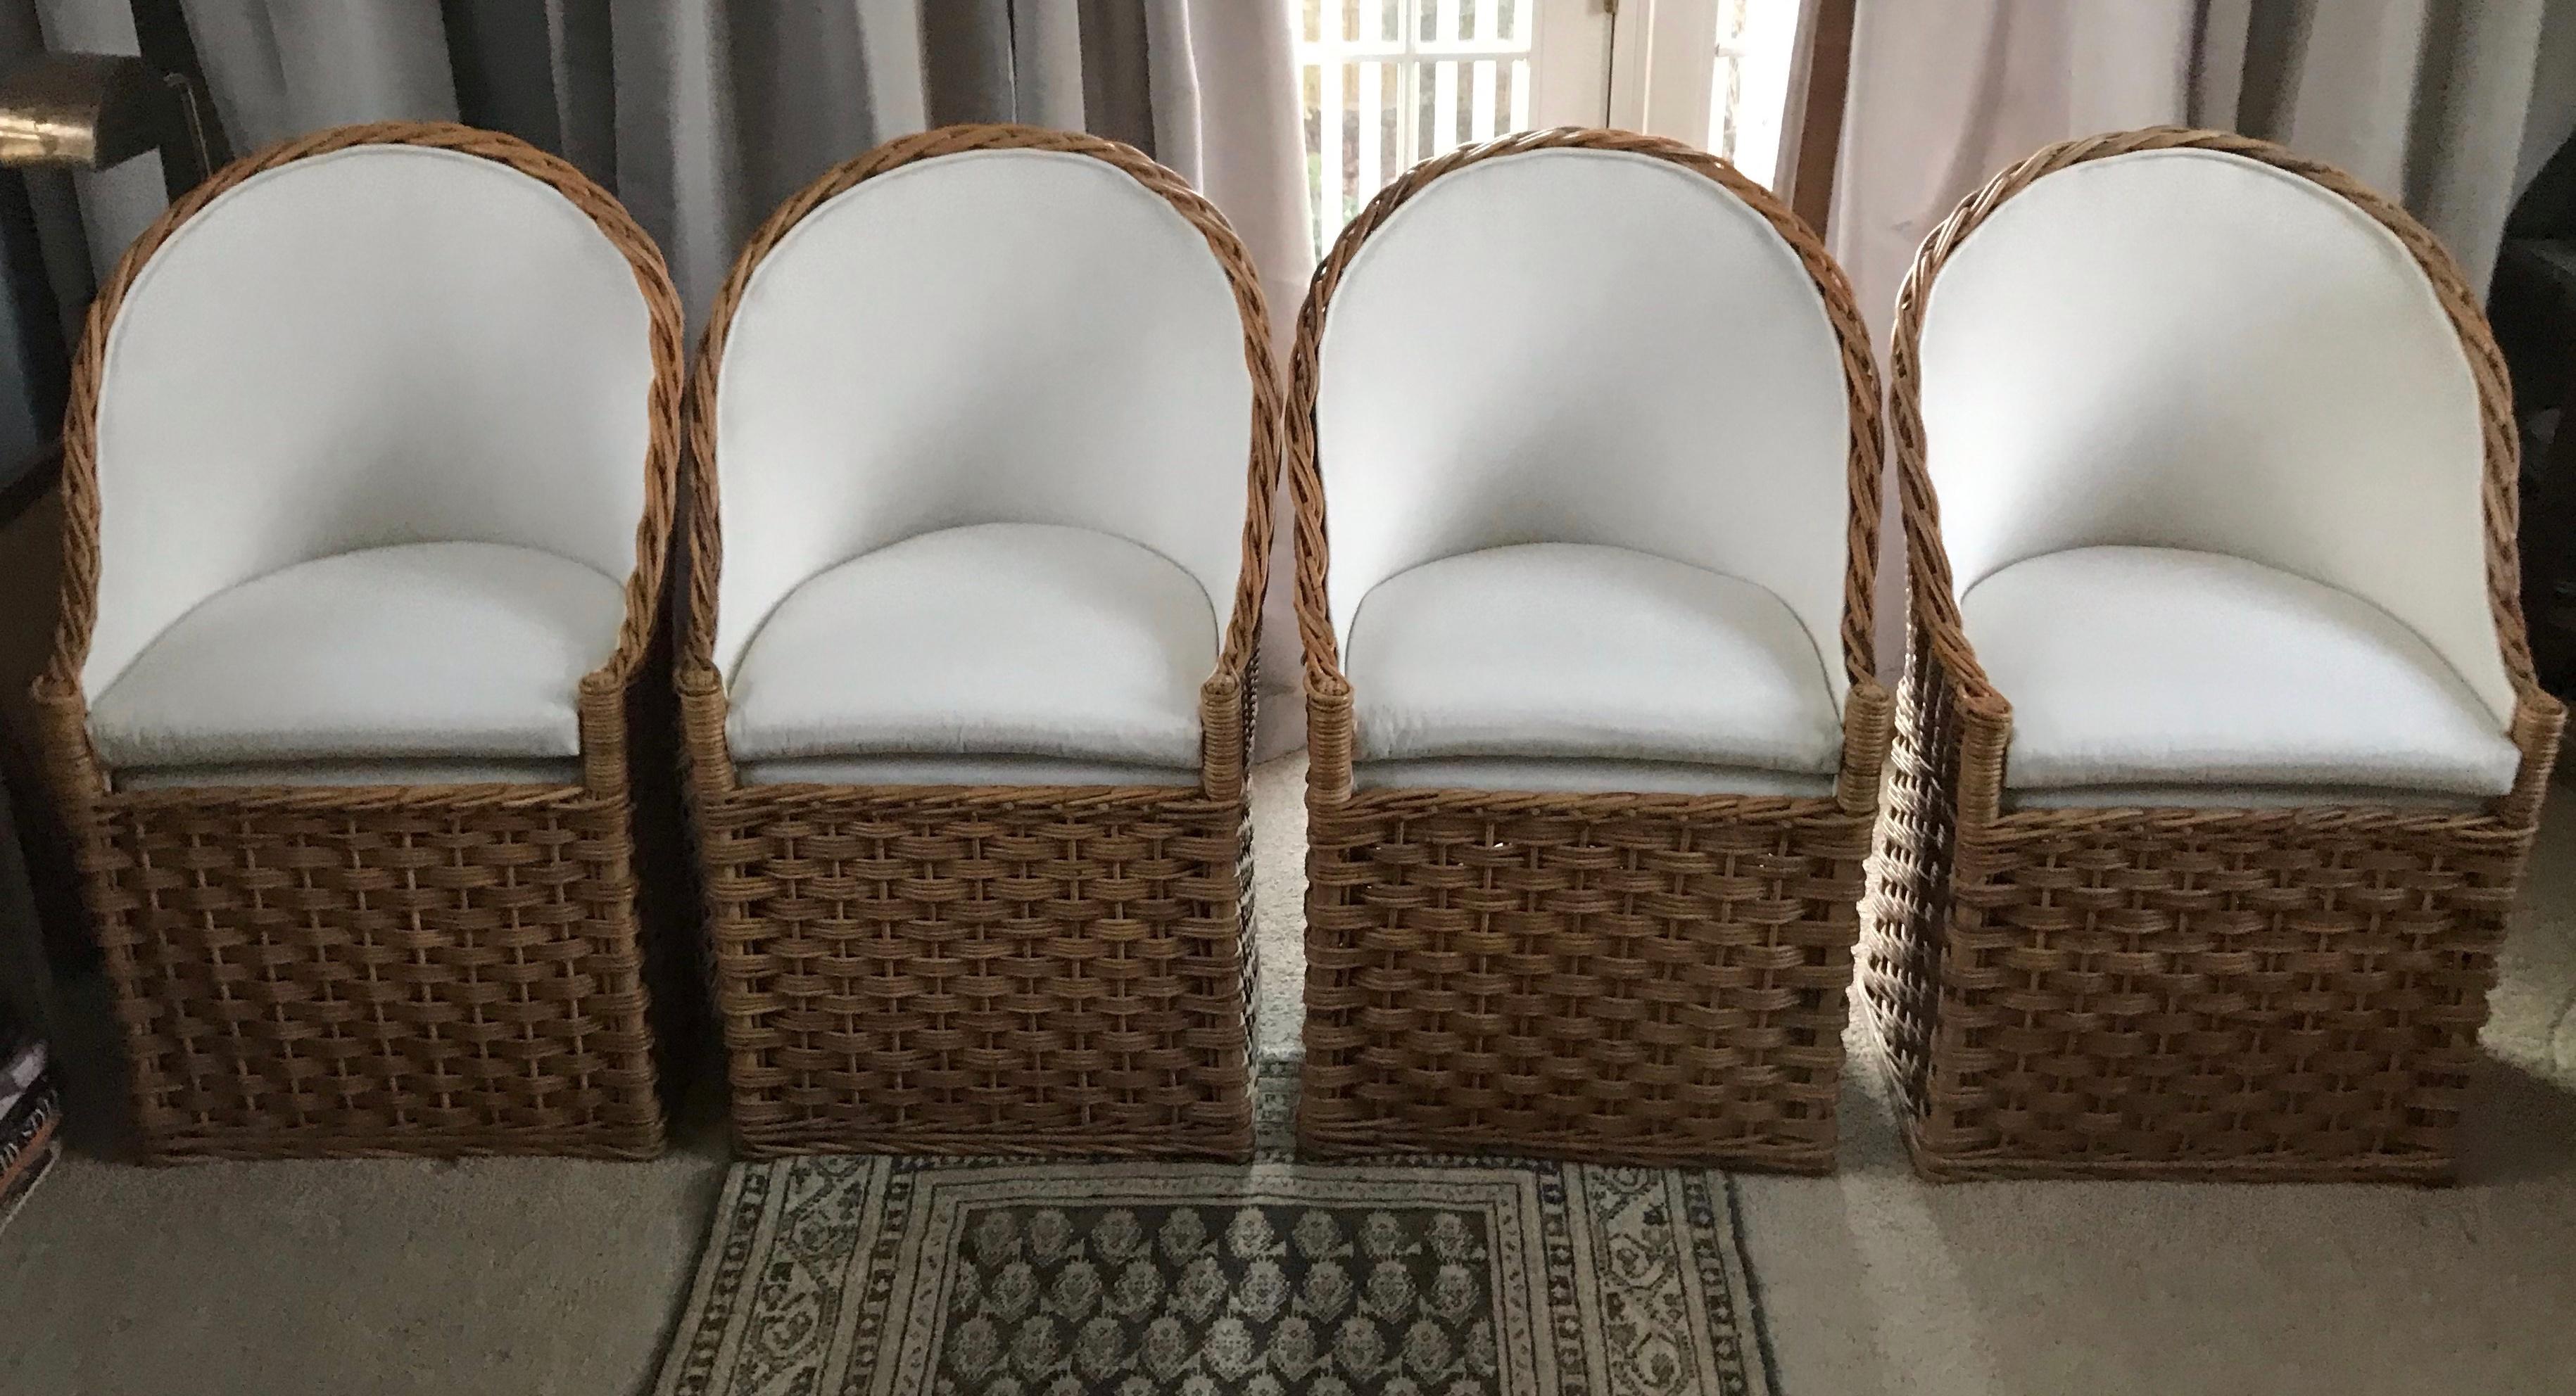 natural wicker chairs